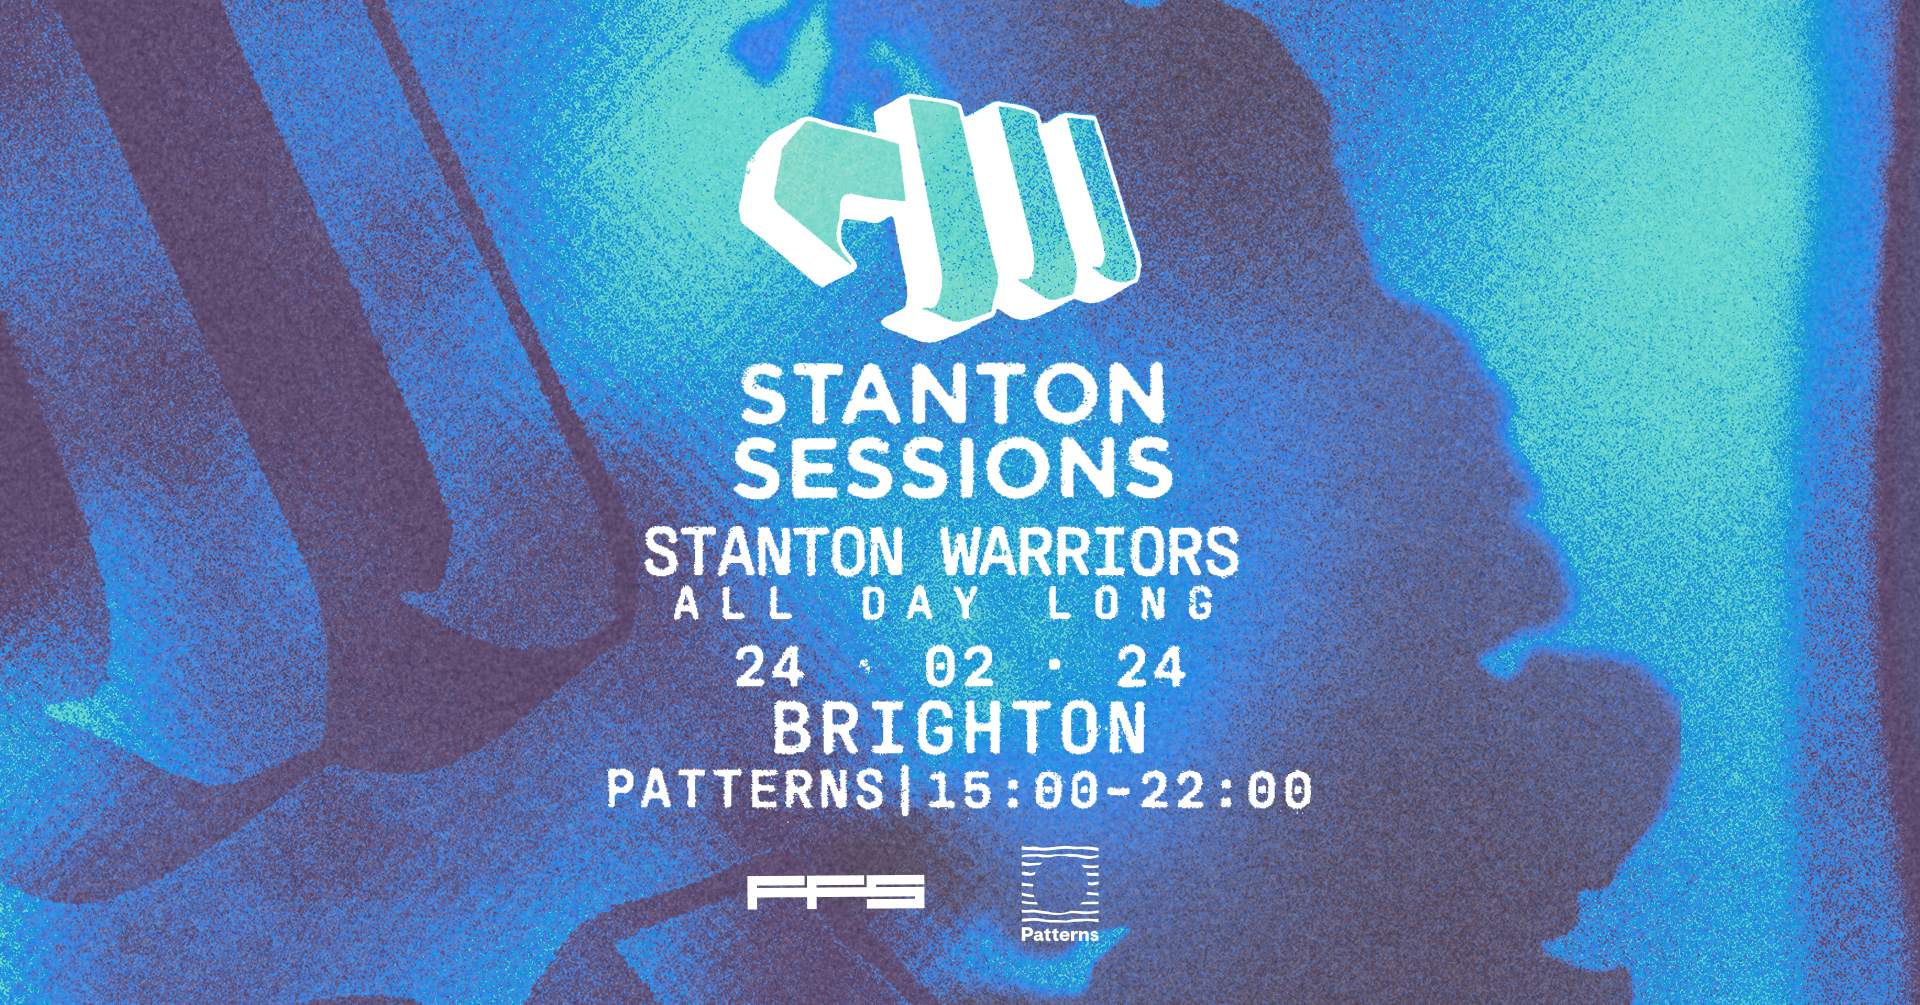 Stanton Sessions: All Day Long - Brighton - フライヤー表